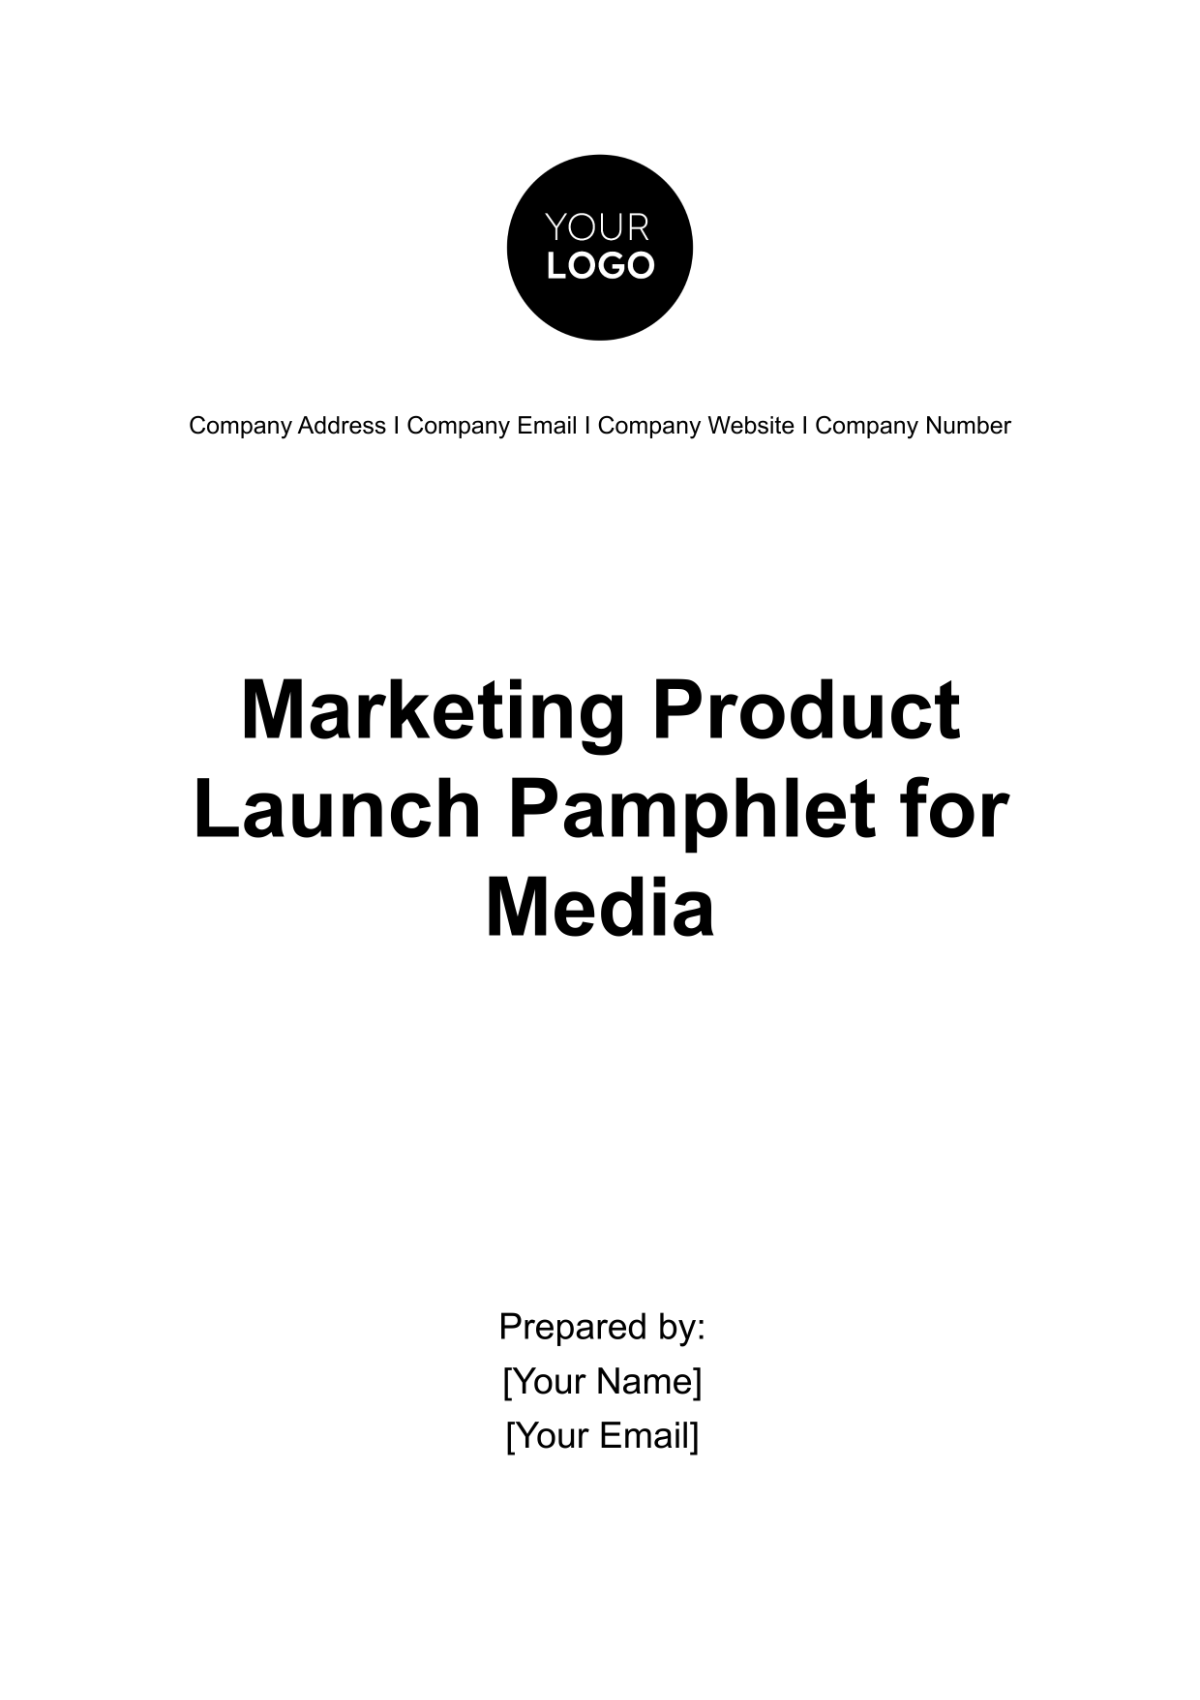 Marketing Product Launch Pamphlet for Media Template